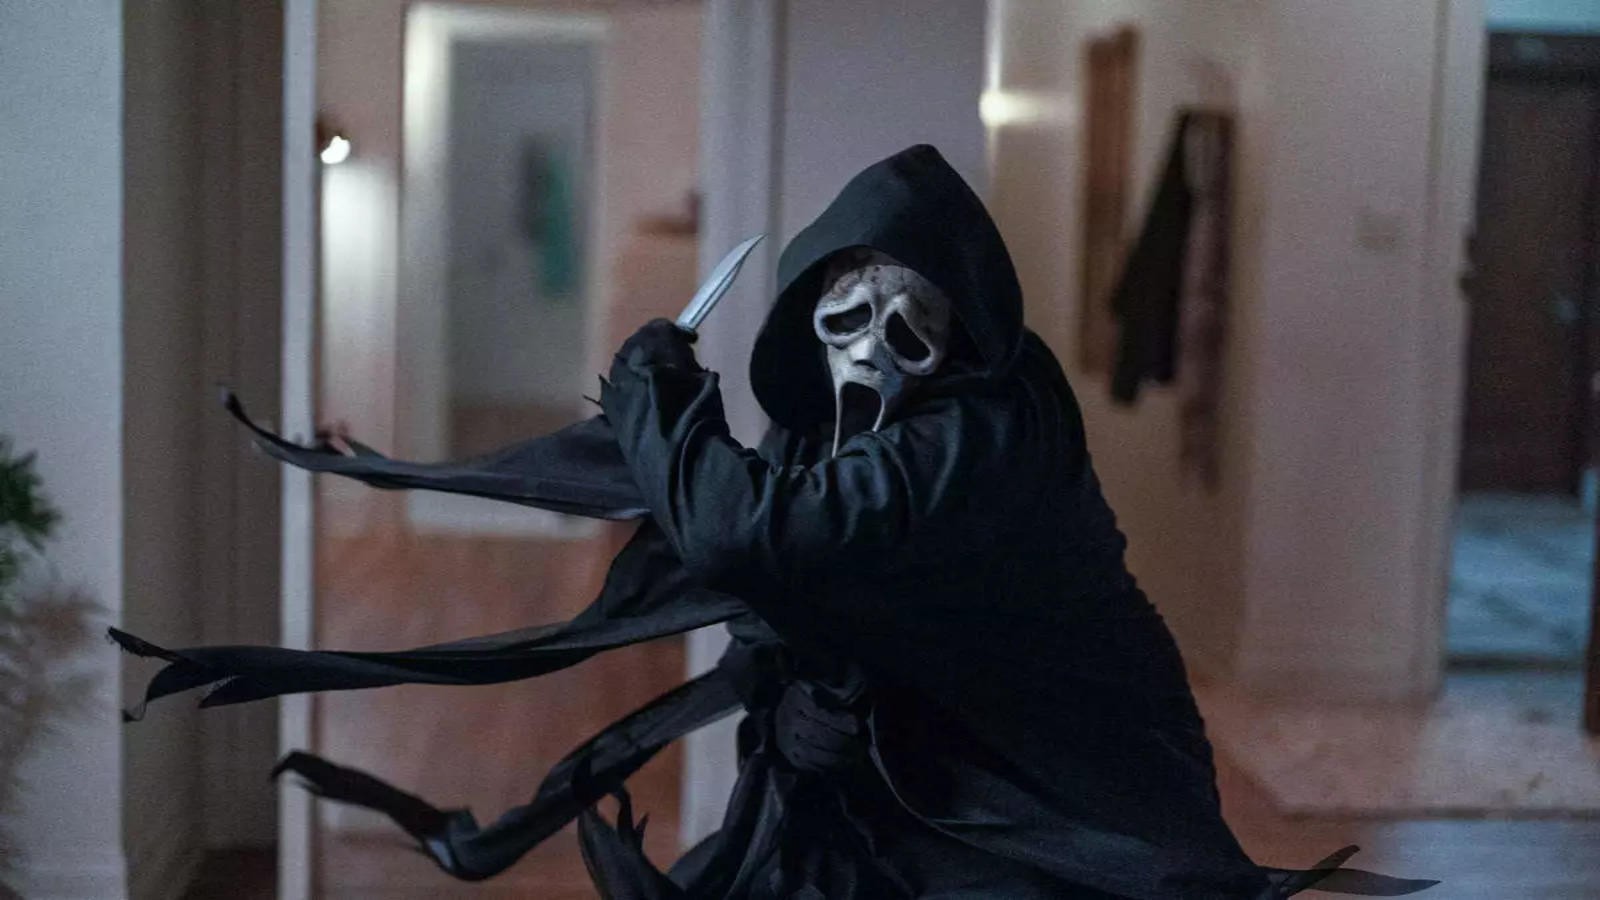 Screengrab of Ghostface from the Scream franchise | Paramount Pictures